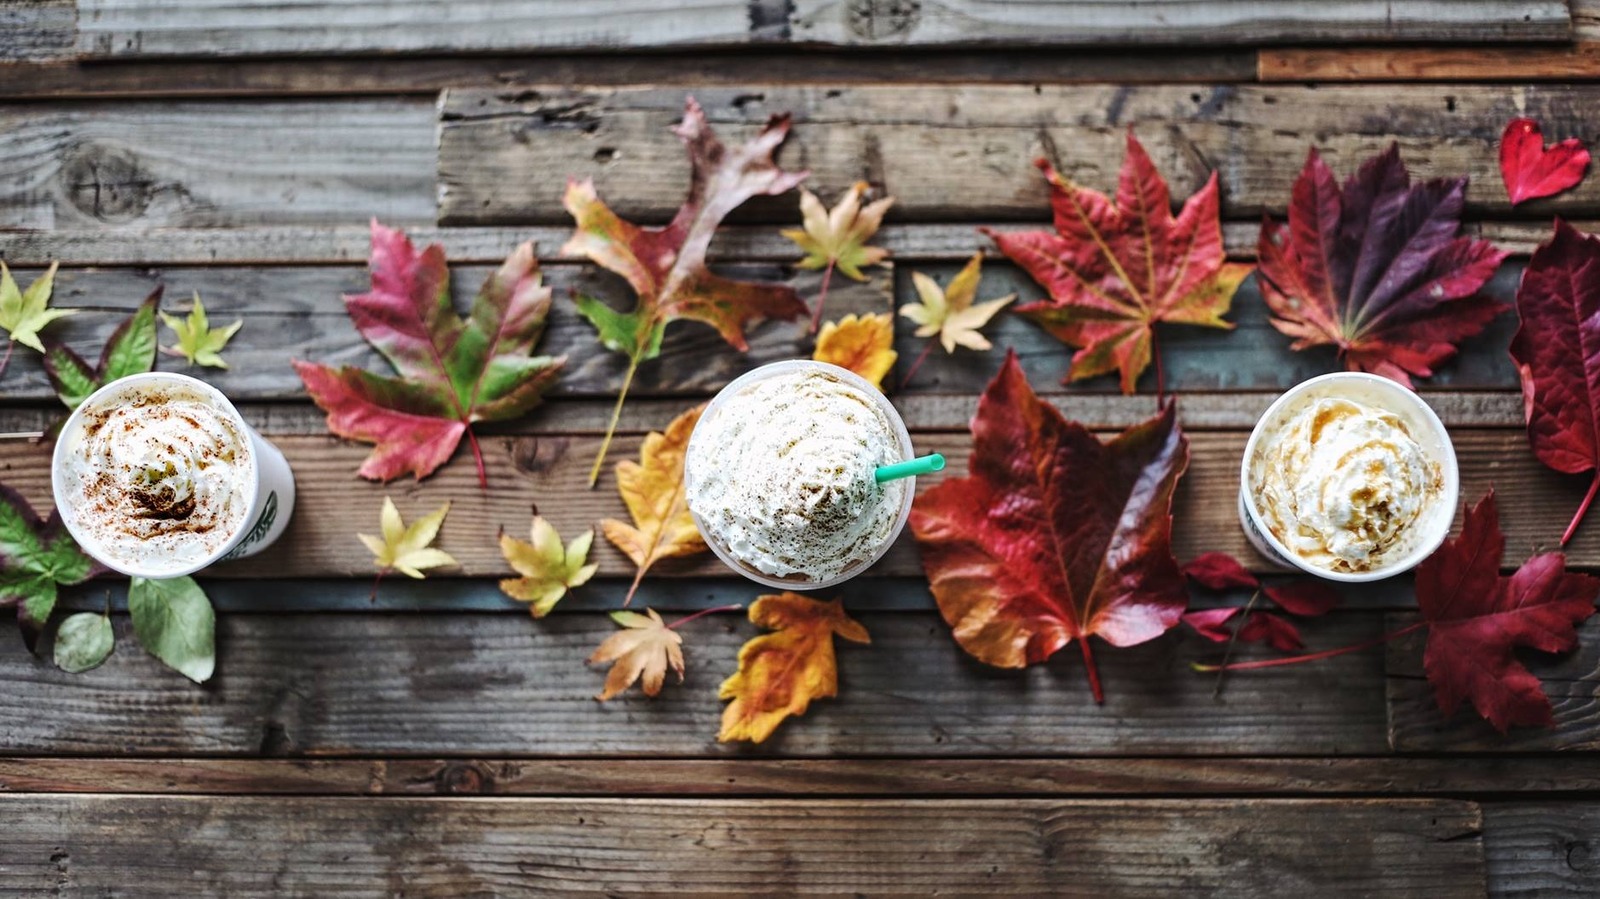 We Finally Know The Return Date Of Starbucks' PSL